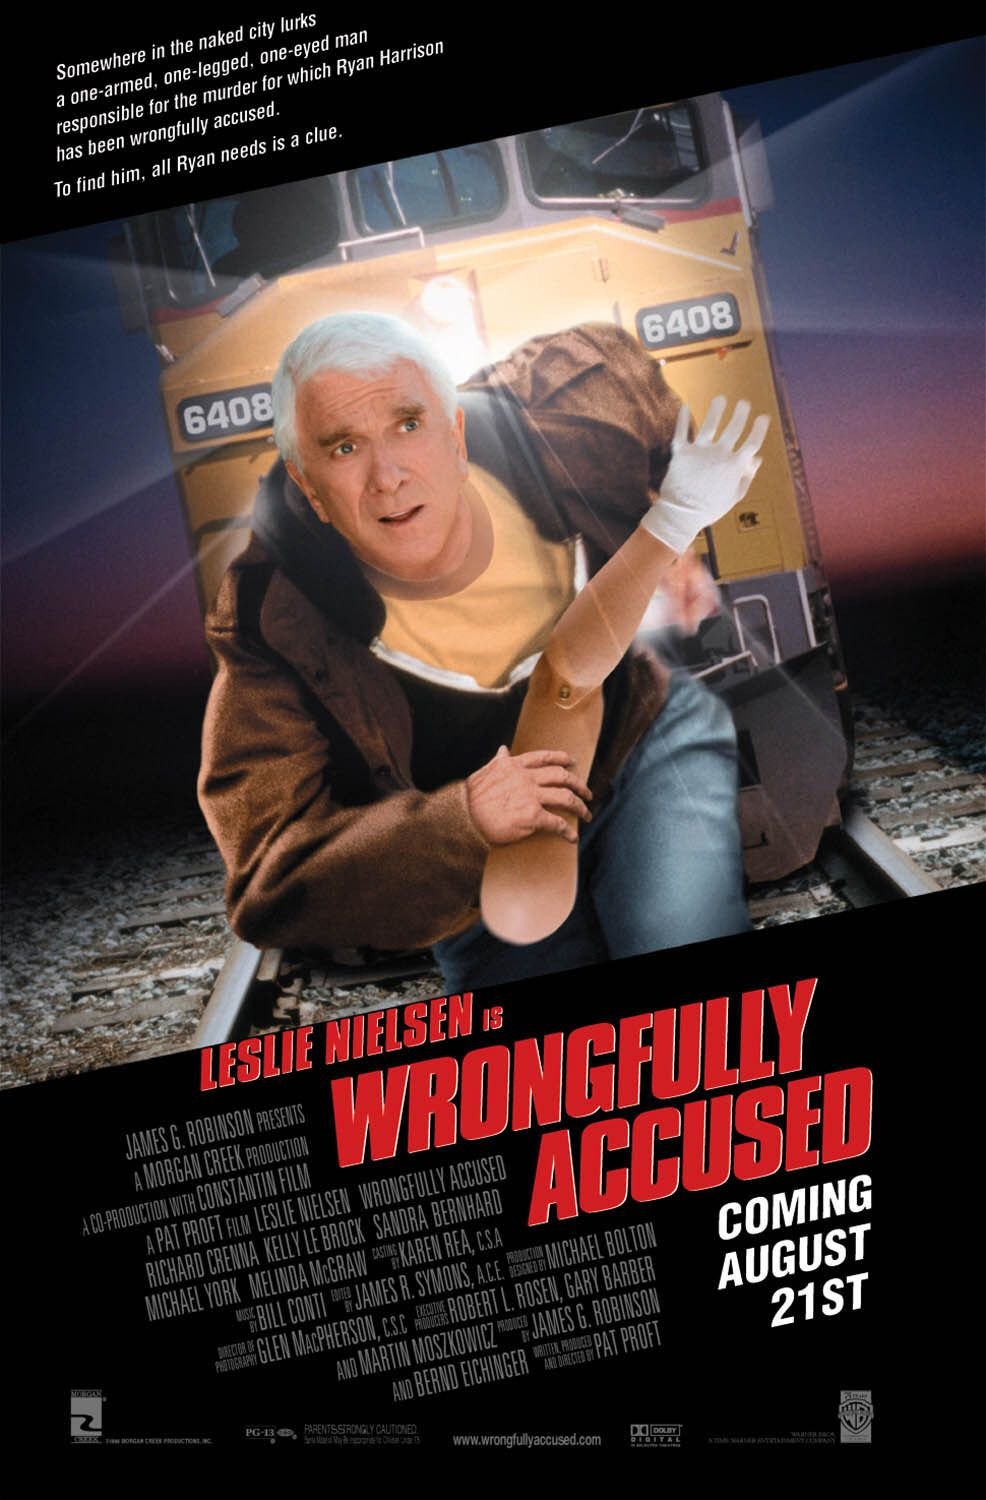 Poster of the movie Wrongfully Accused